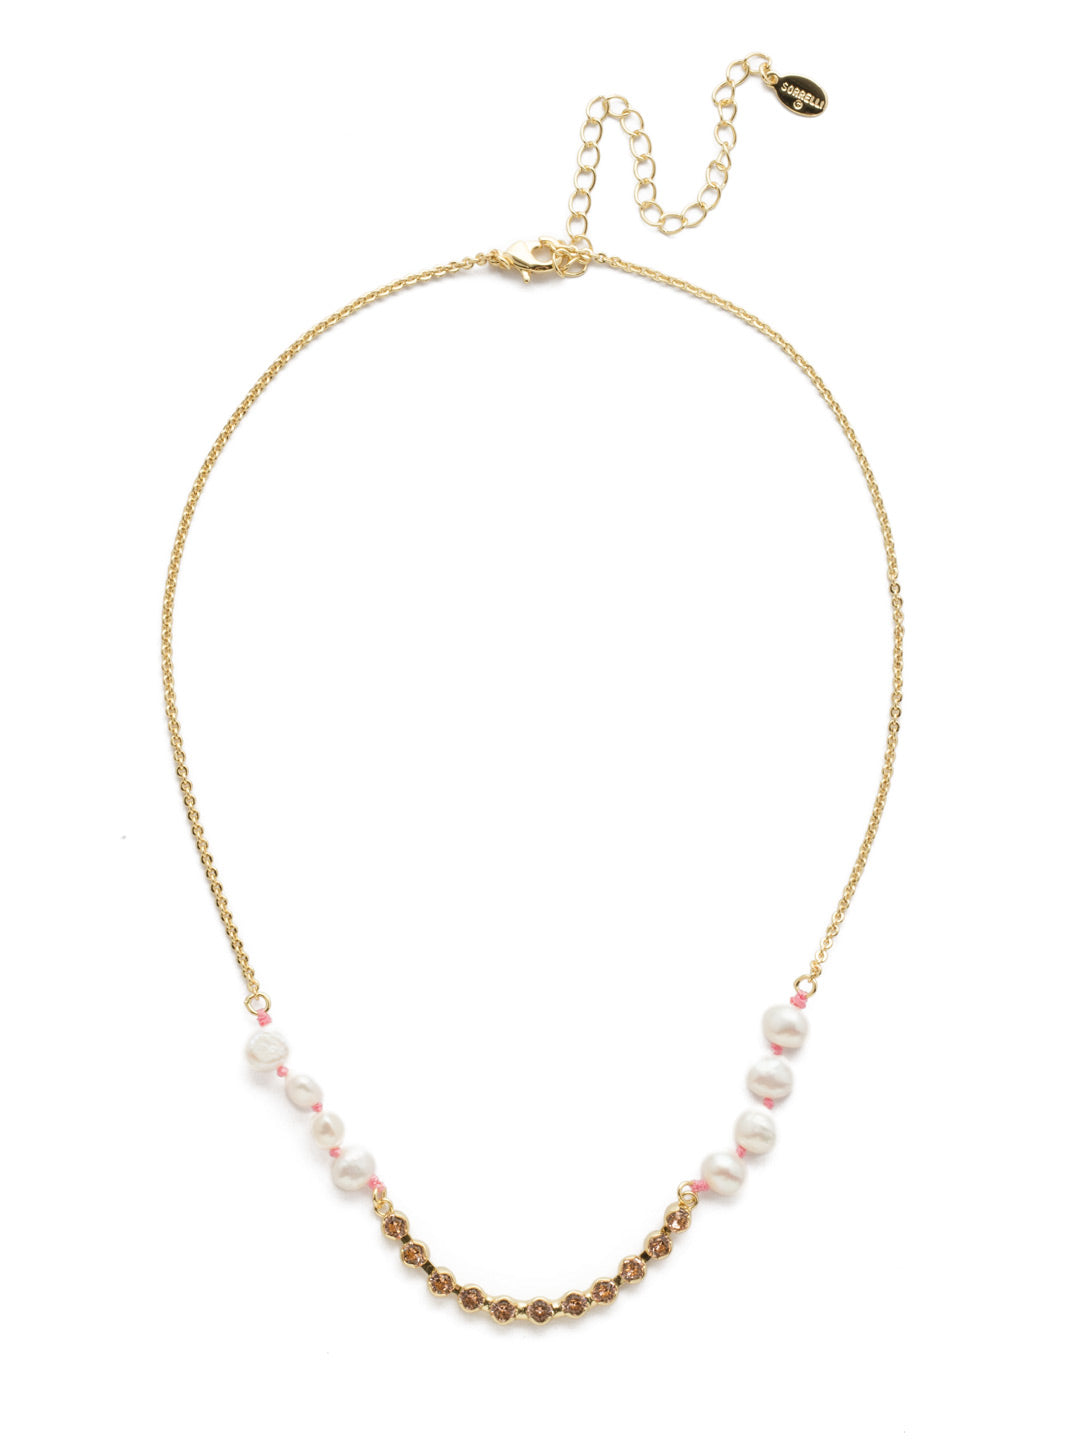 Pride & Joy Long Necklace - NEK5BGISS - <p>Style and sophistication - both are found in this classic necklace with shimmering crystals and freshwater pearl accents. This pearl classic necklace is perfect for any occasion. From Sorrelli's Island Sun collection in our Bright Gold-tone finish.</p>